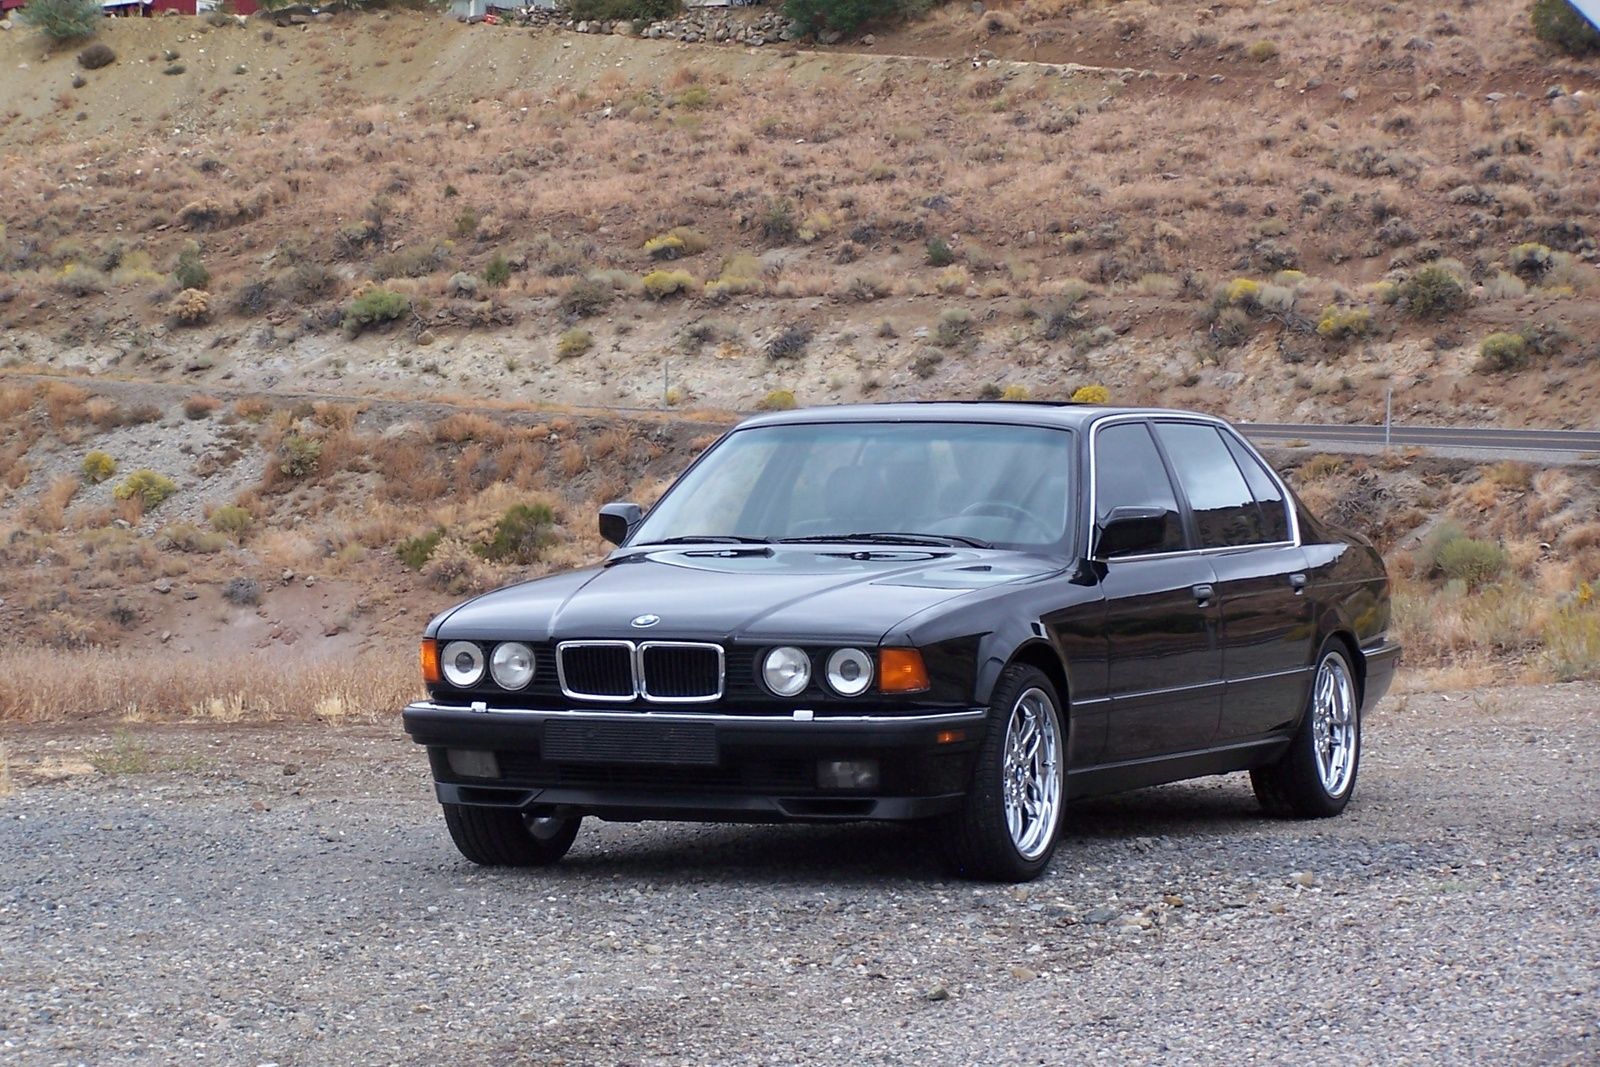 BMW 7 Series Questions The NA 93 (5 93) BMW E32 740iL Come With A LSD?